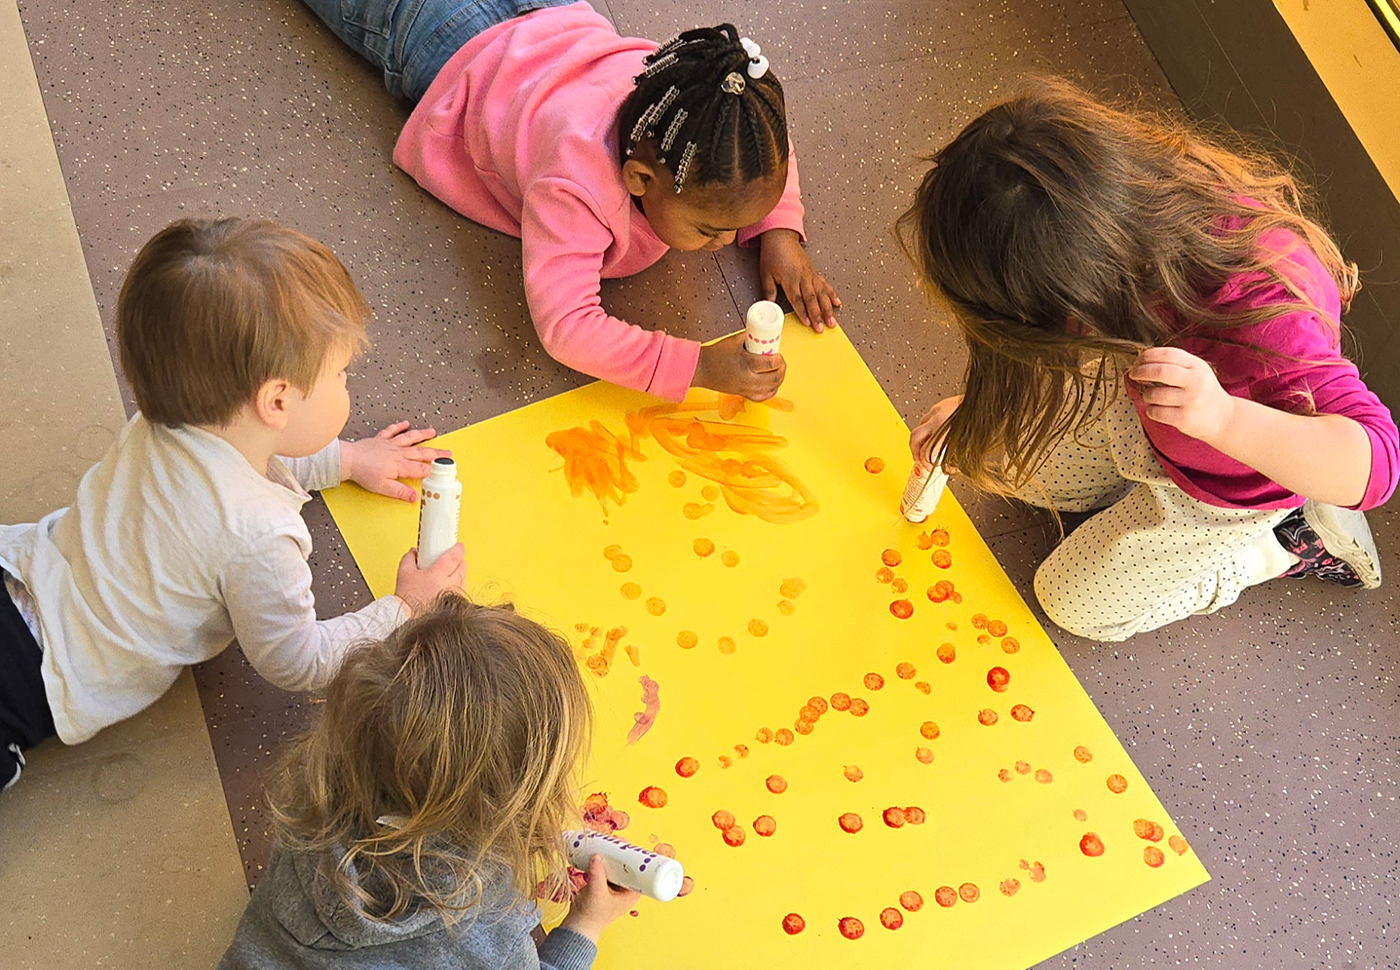 Four small children surround a large sheet of yellow construction paper, stamping red circles on the paper using large ink stamps.